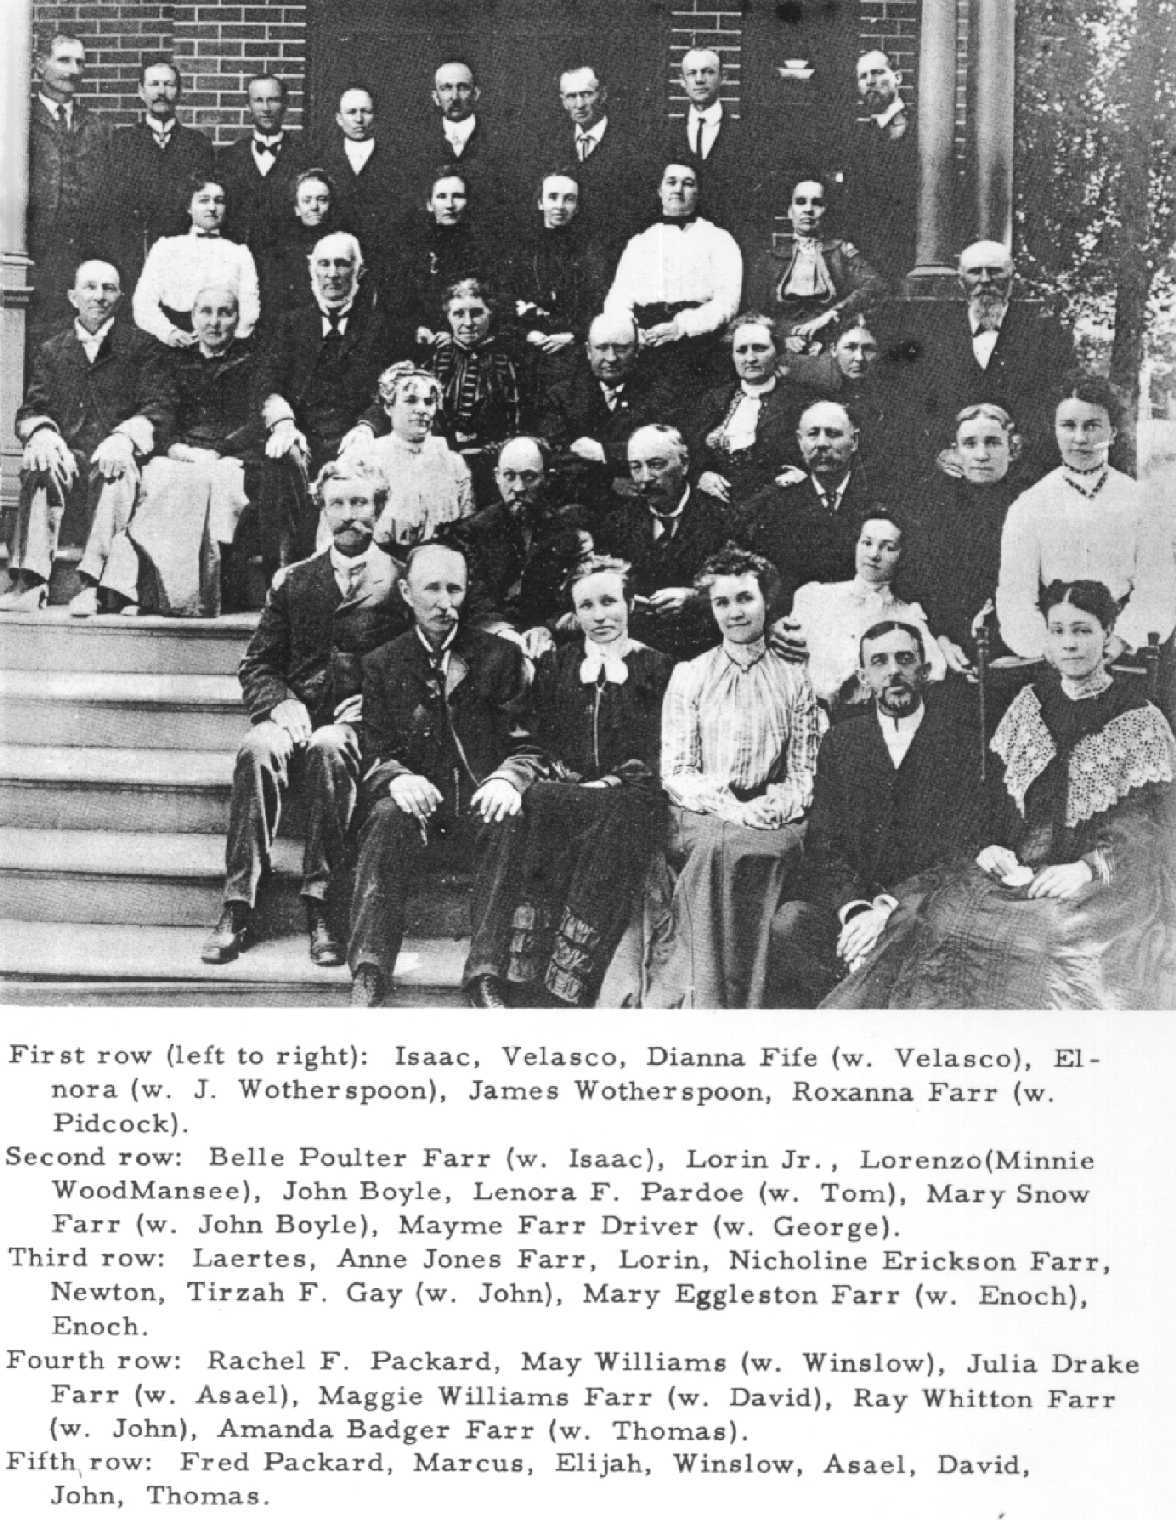 Valasco Farr and Diana Fife Farr with group